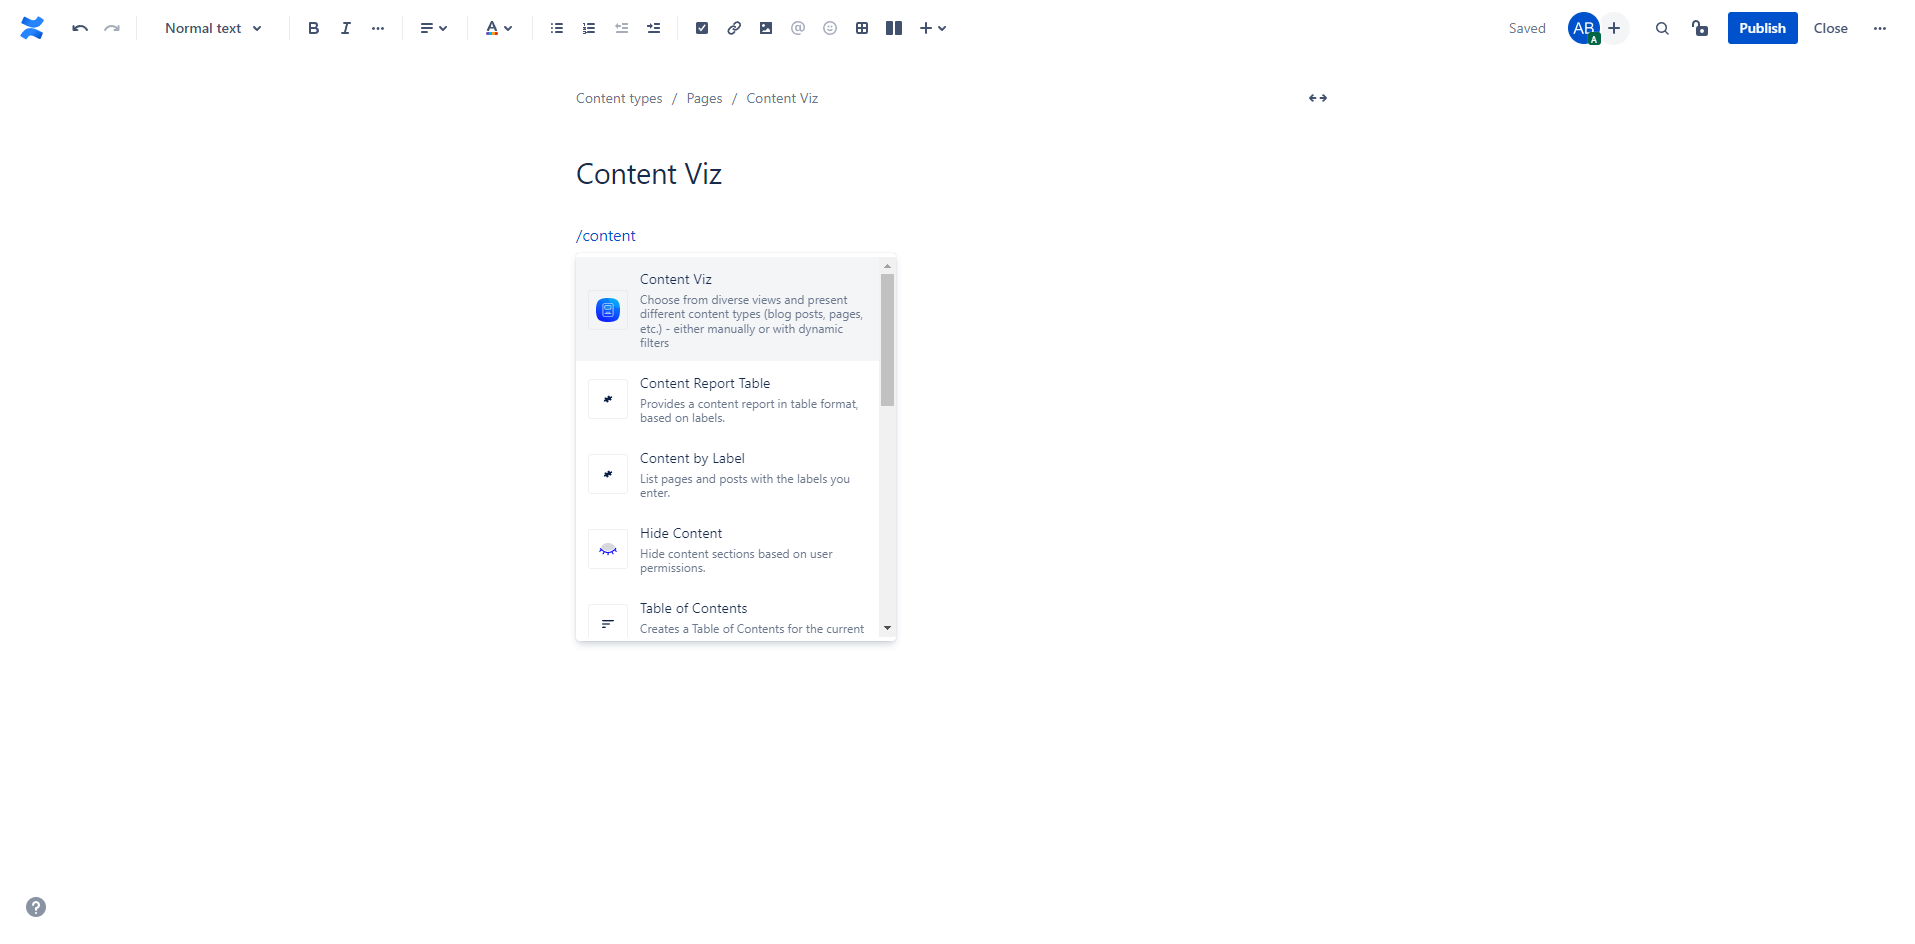 Insert-Content-Viz-to-Confluence-page